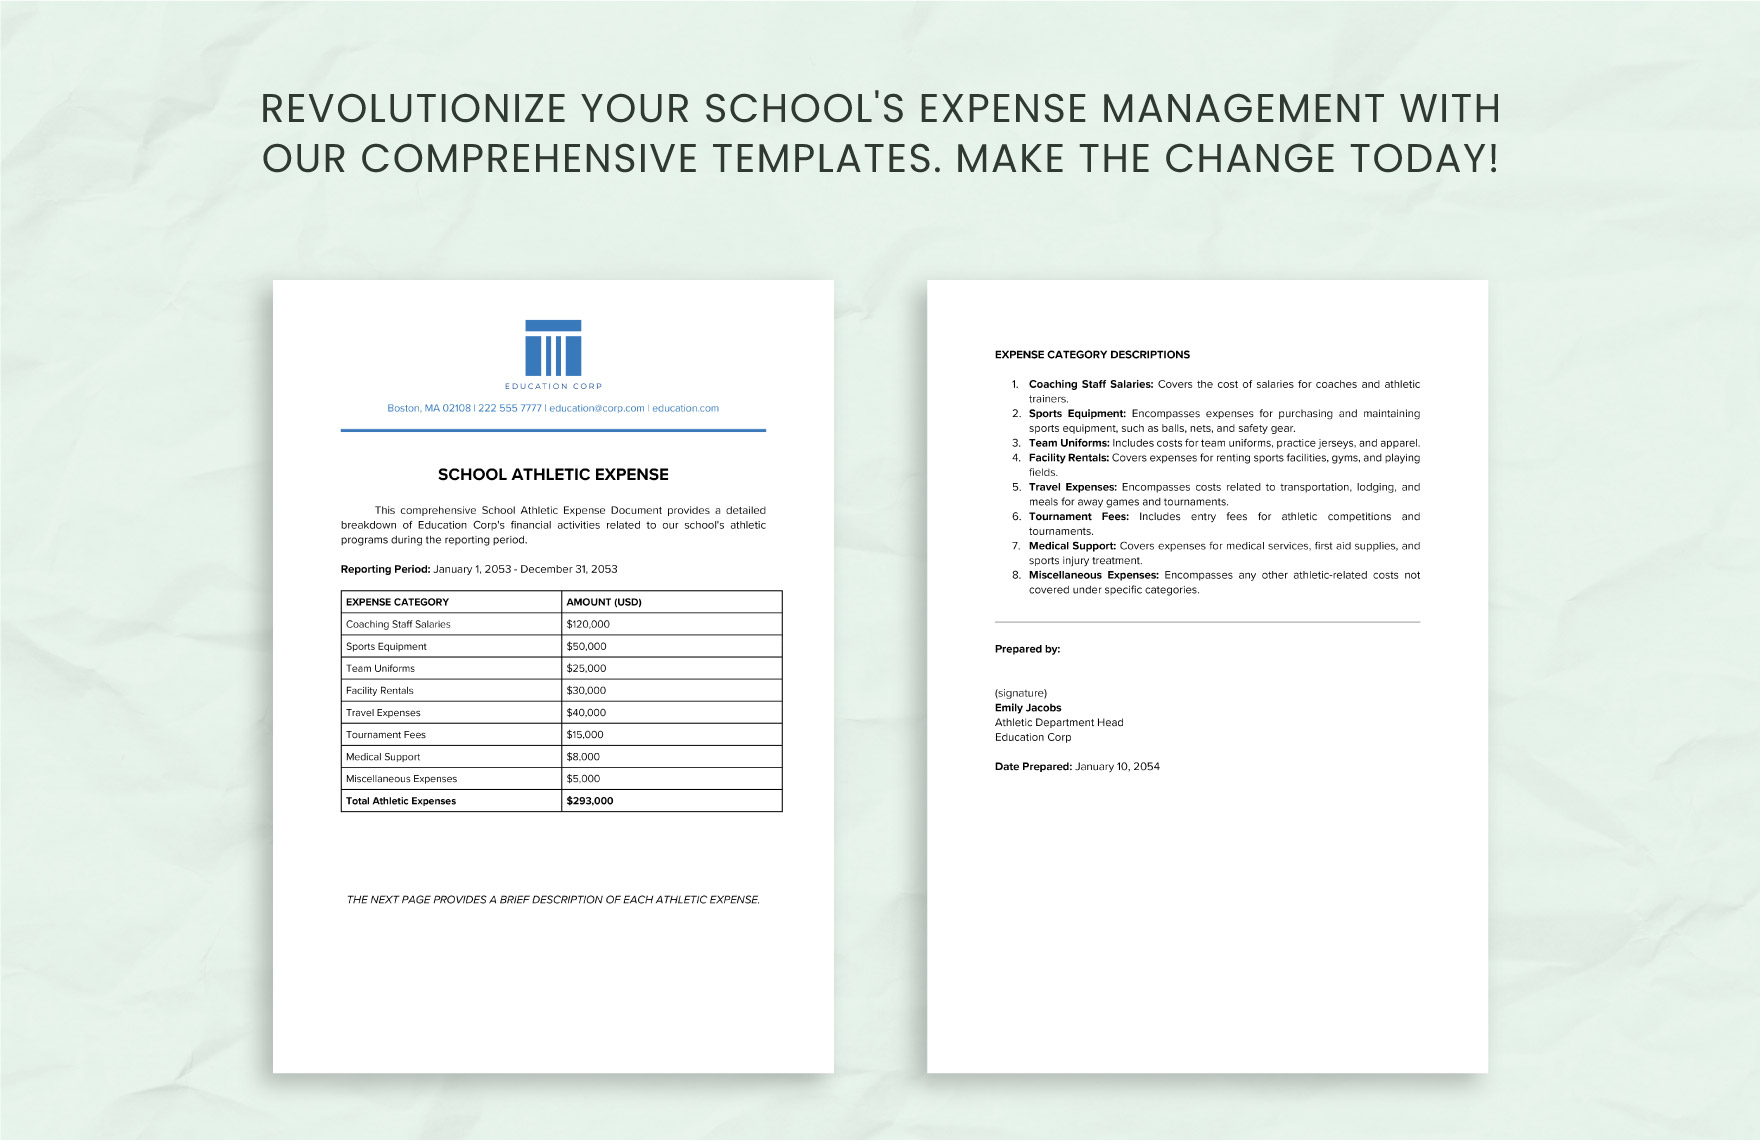 School Athletic Expense Template